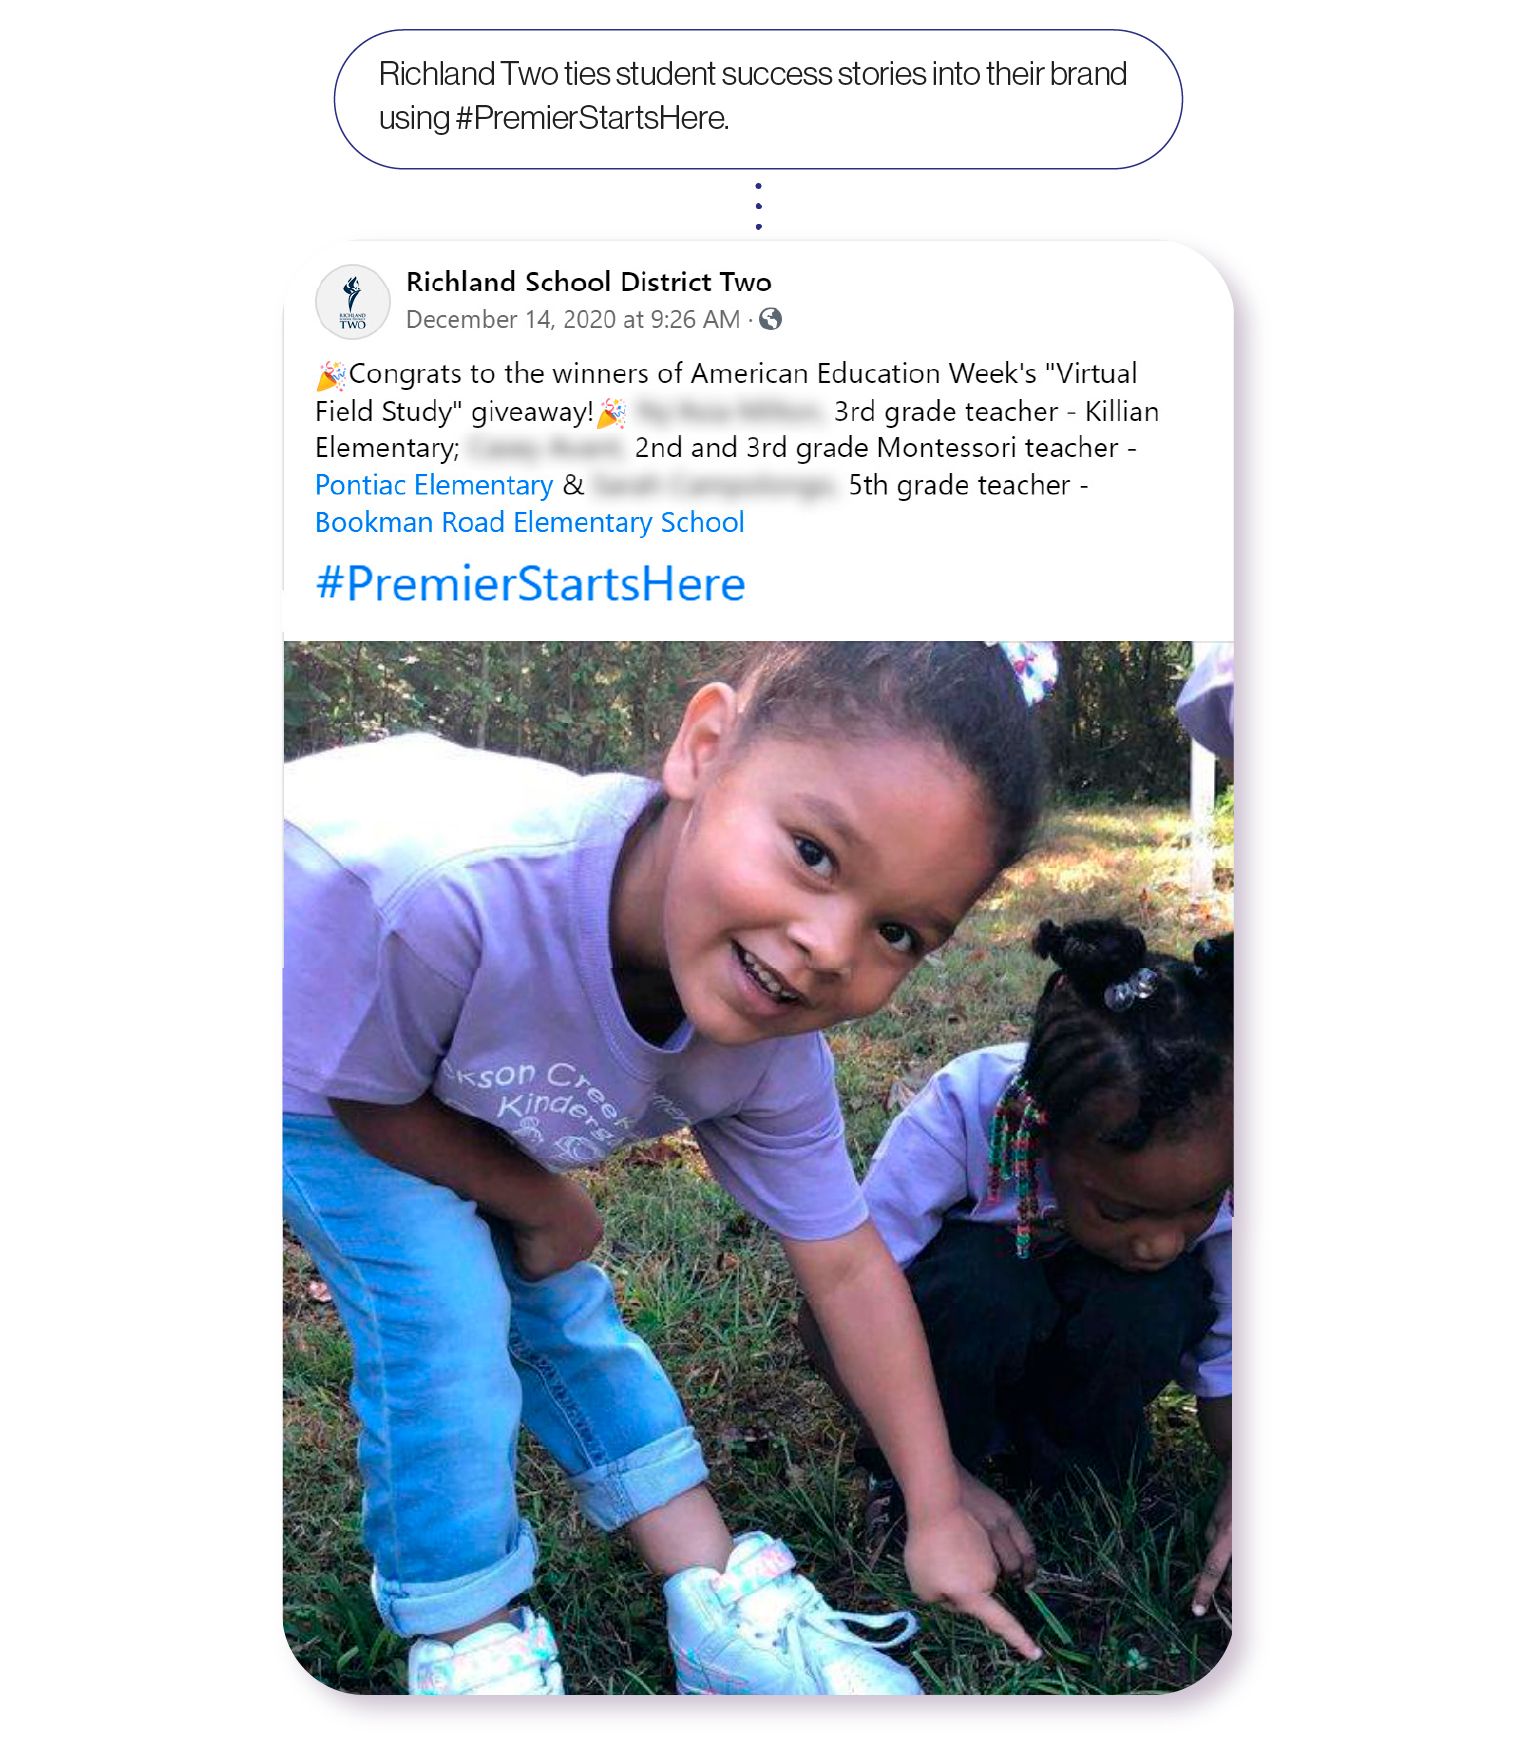 Image: Facebook post from Richland Two School District. Richland Two ties student success stories into their brand using #PremierStartsHere.